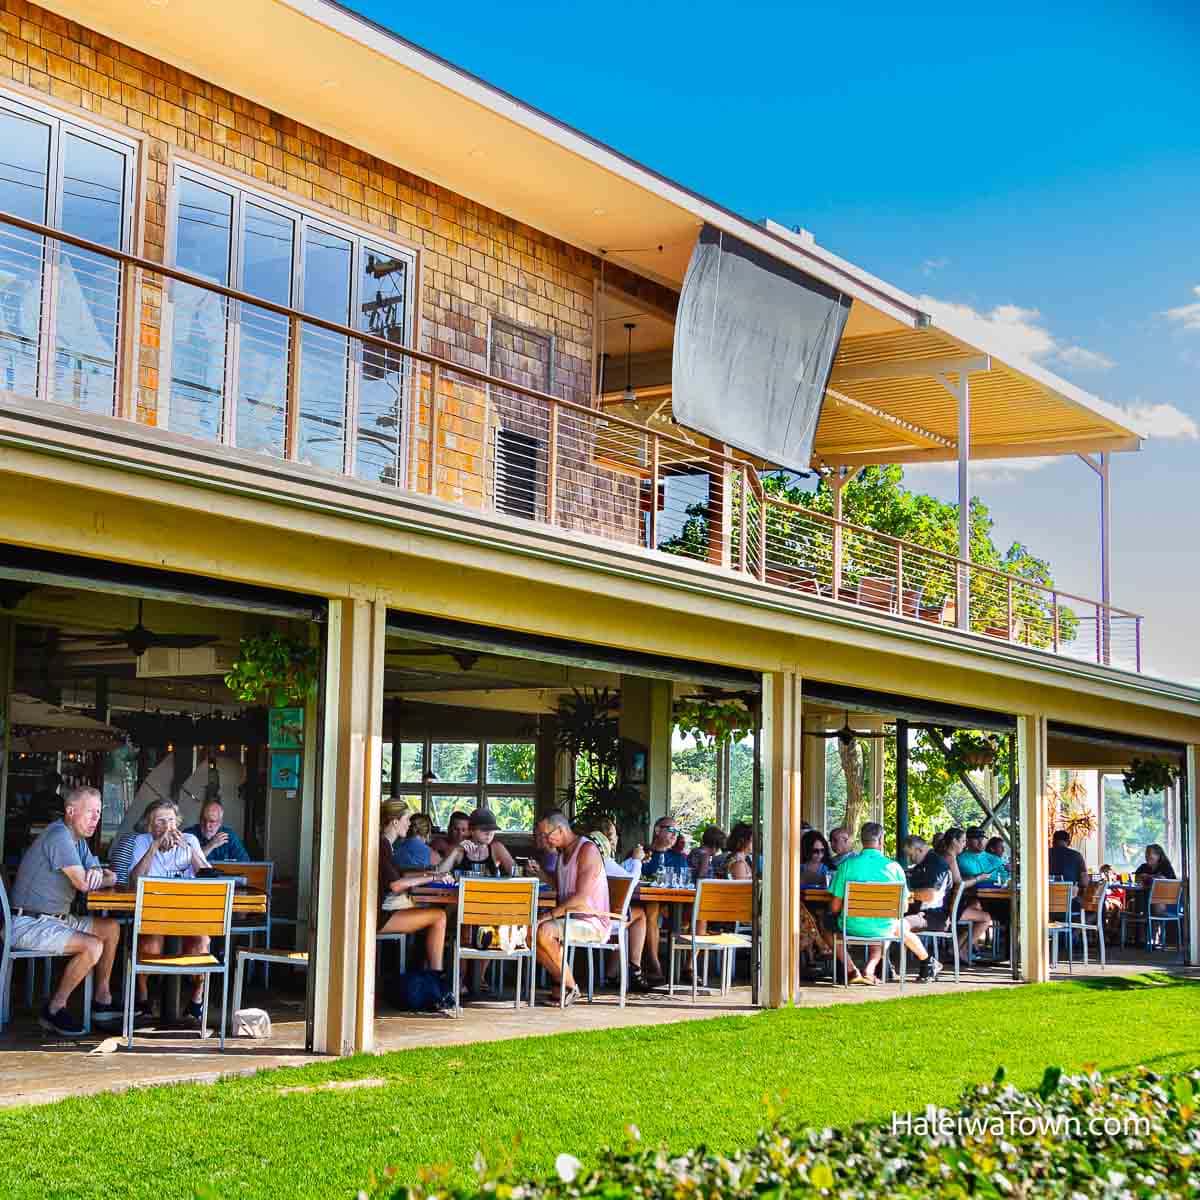 two story building restaurant with covered outdoor seating full of people dining overlooking green grass on a sunny day